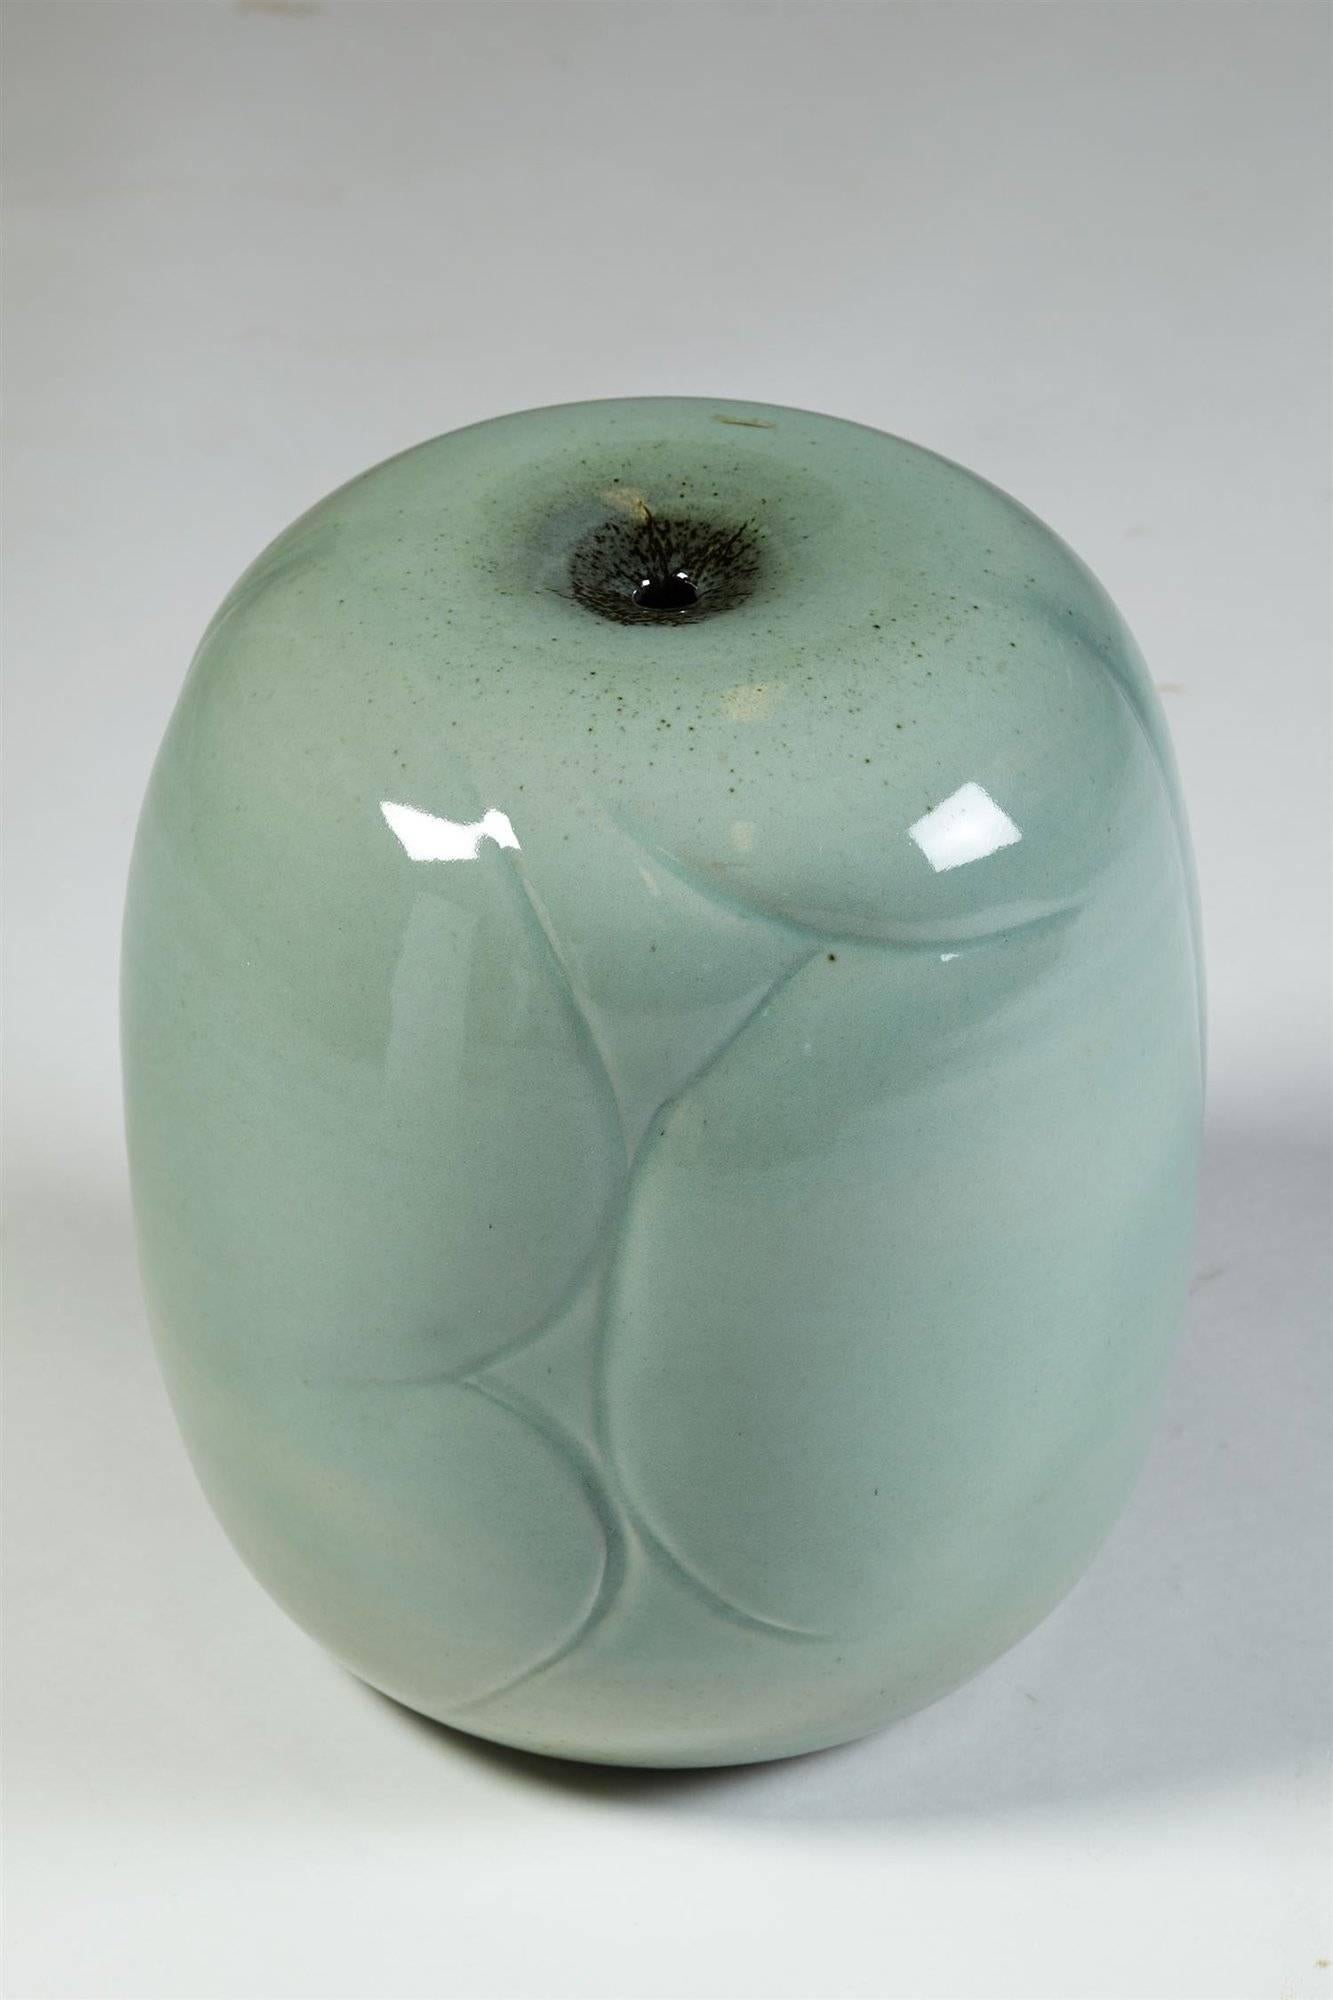 Vase designed by Carl-Harry Stålhane for Designhuset, 
Sweden, 1980s

Stoneware.

Signed.

Dimensions:
H: 37 cm/ 14 1/2''

Carl-Harry Stålhane (1920-1990) was born in the town of Mariestad, in the west of Sweden. As a child, he dreamed of being a